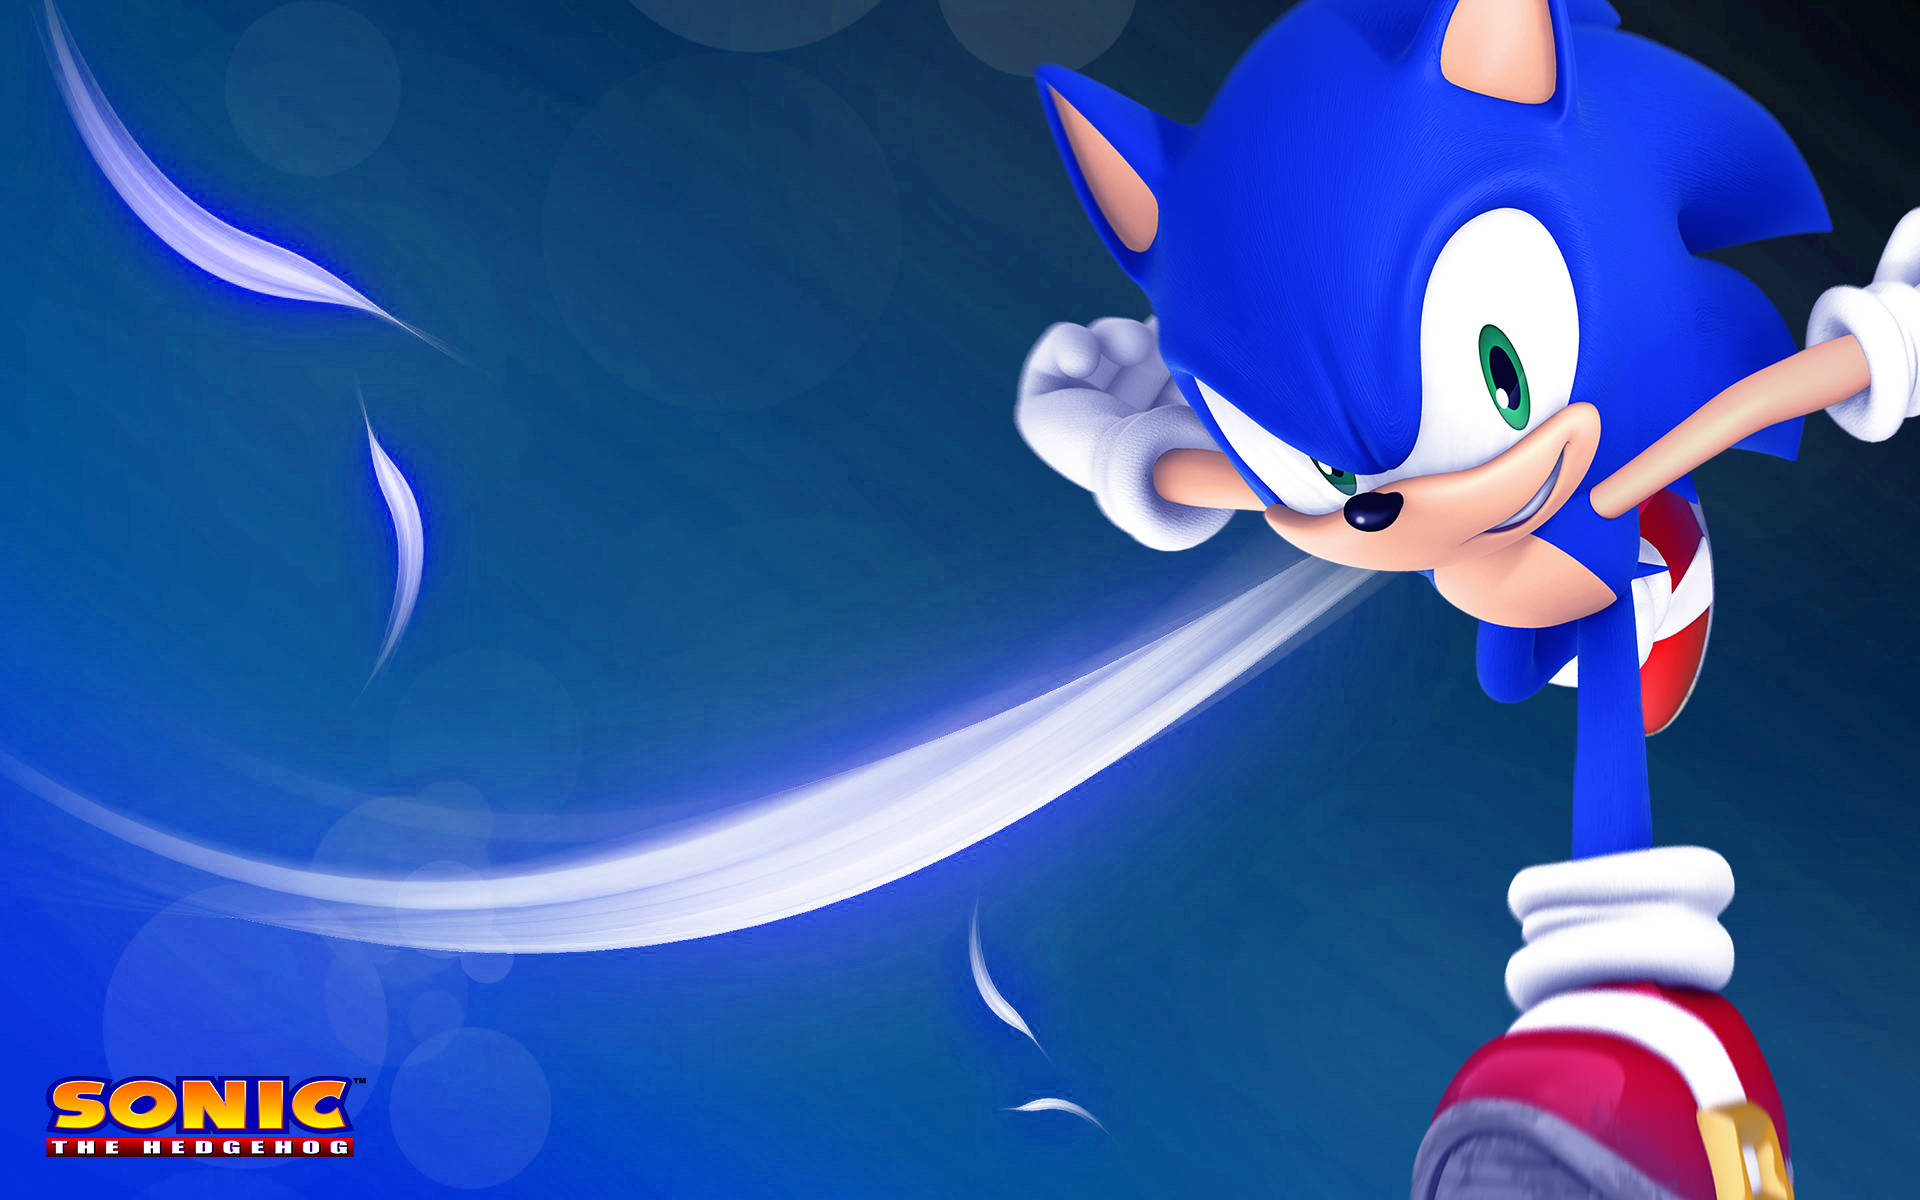 Cool Classic Sonic the Hedgehog tapeter findes. Wallpaper